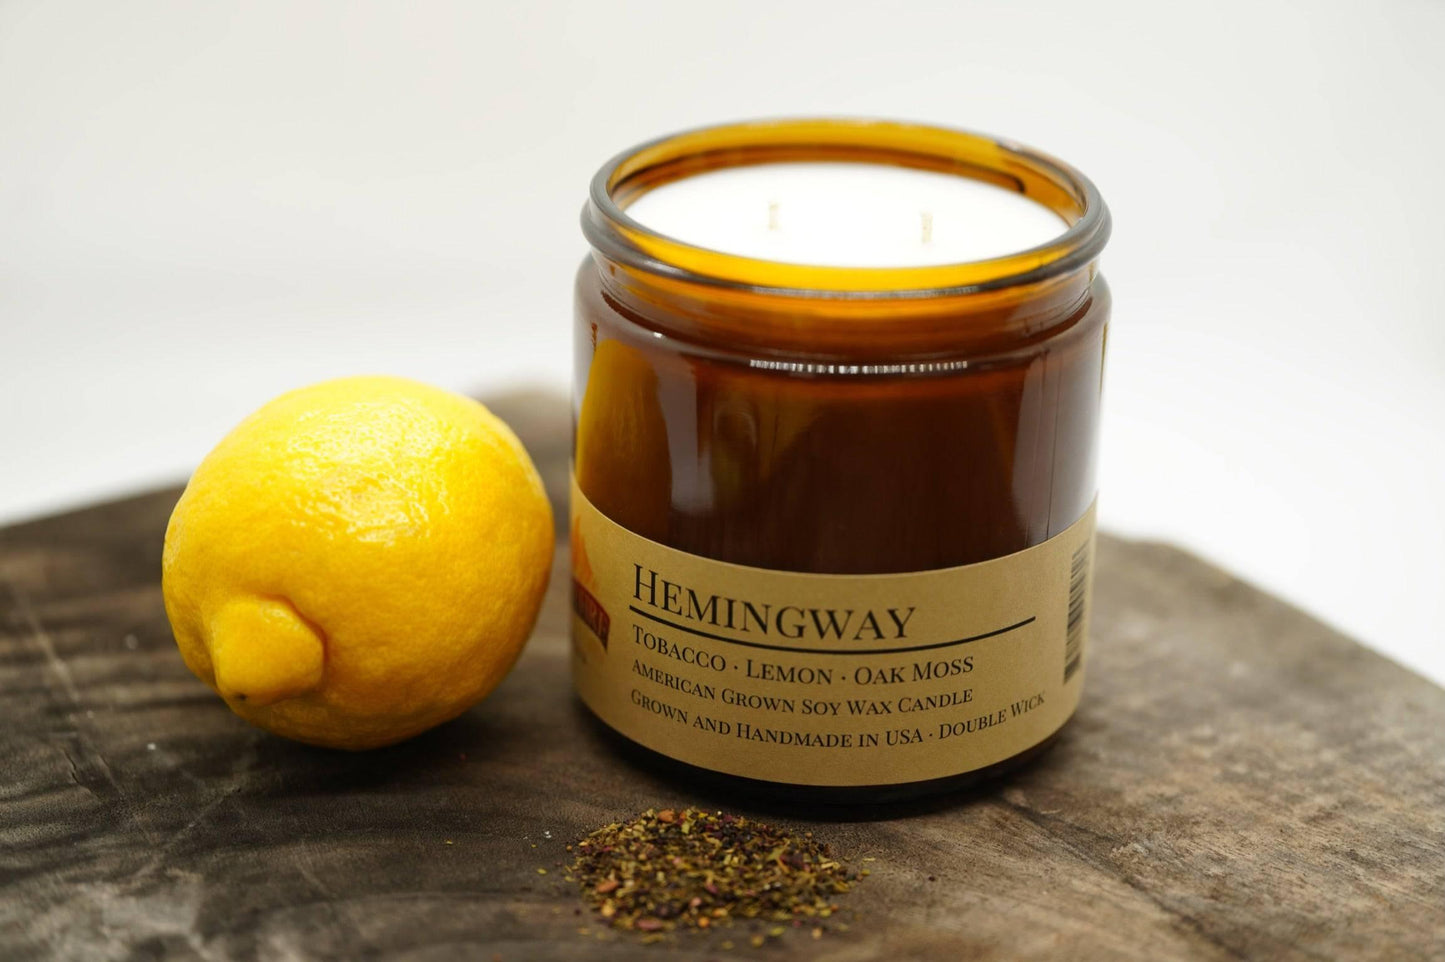 hemingway soy wax candle | 16 oz double wick amber apothecary jar by prairie fire tallow, candles, and lavender